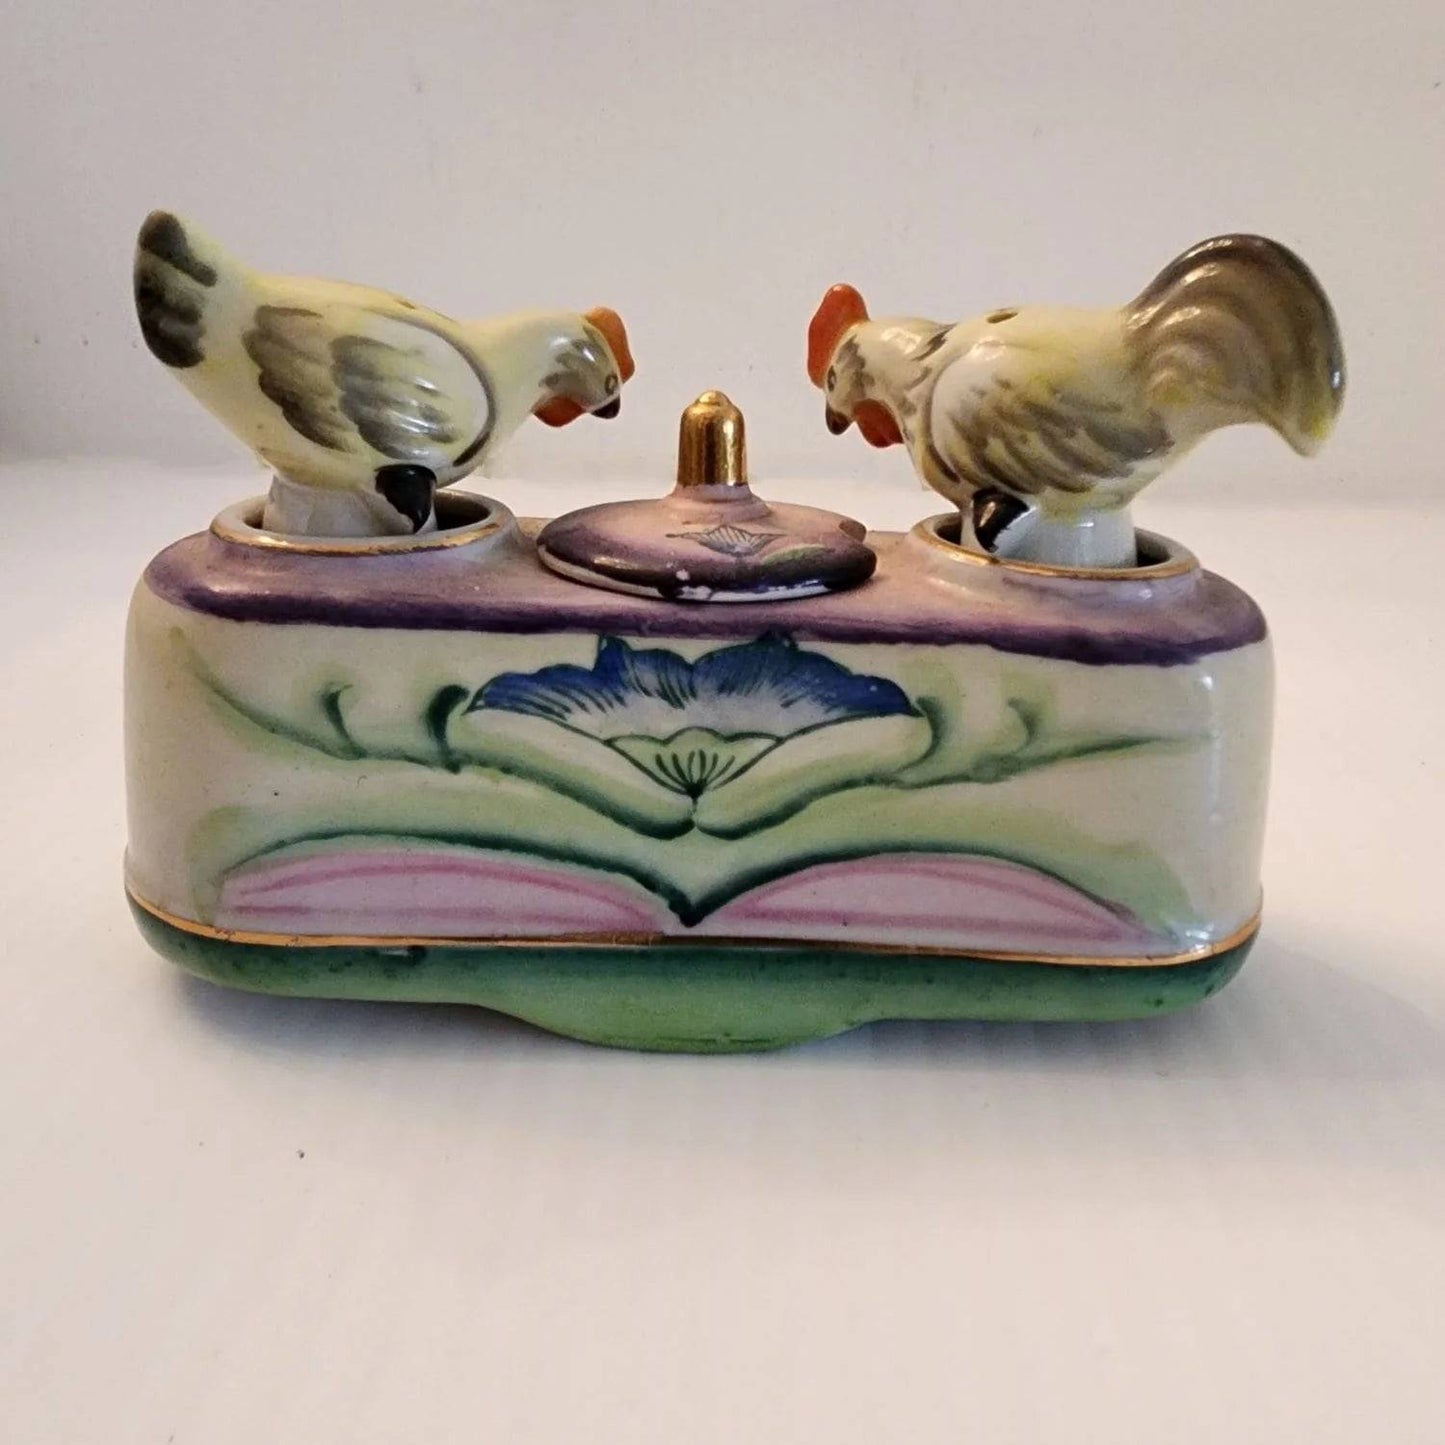 Ceramic box with two bobble birds on the top